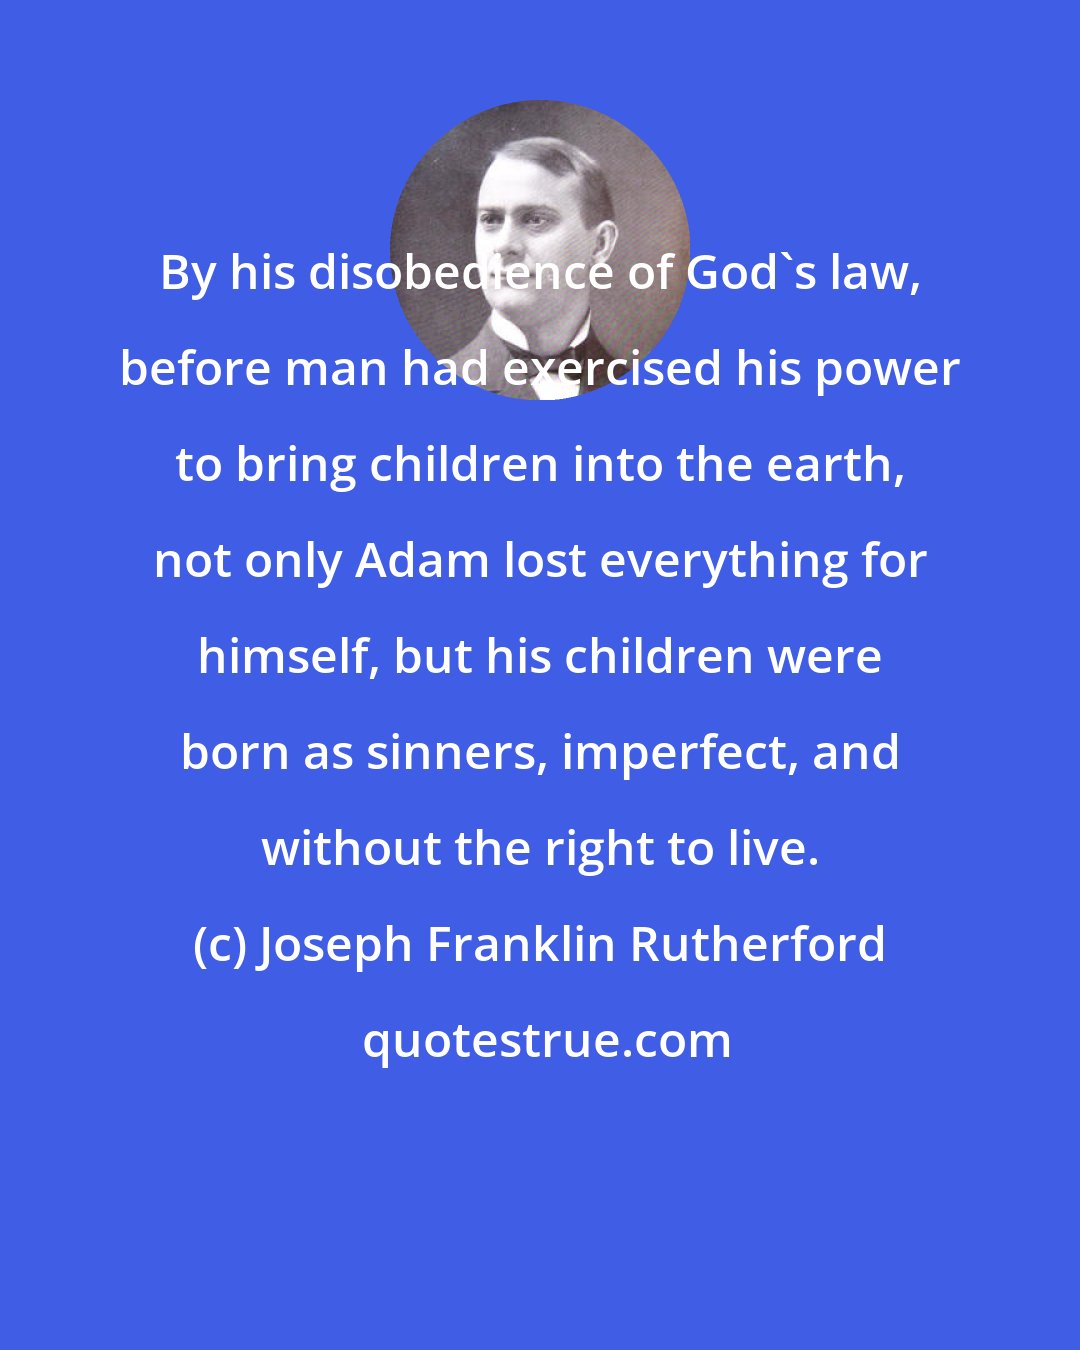 Joseph Franklin Rutherford: By his disobedience of God's law, before man had exercised his power to bring children into the earth, not only Adam lost everything for himself, but his children were born as sinners, imperfect, and without the right to live.